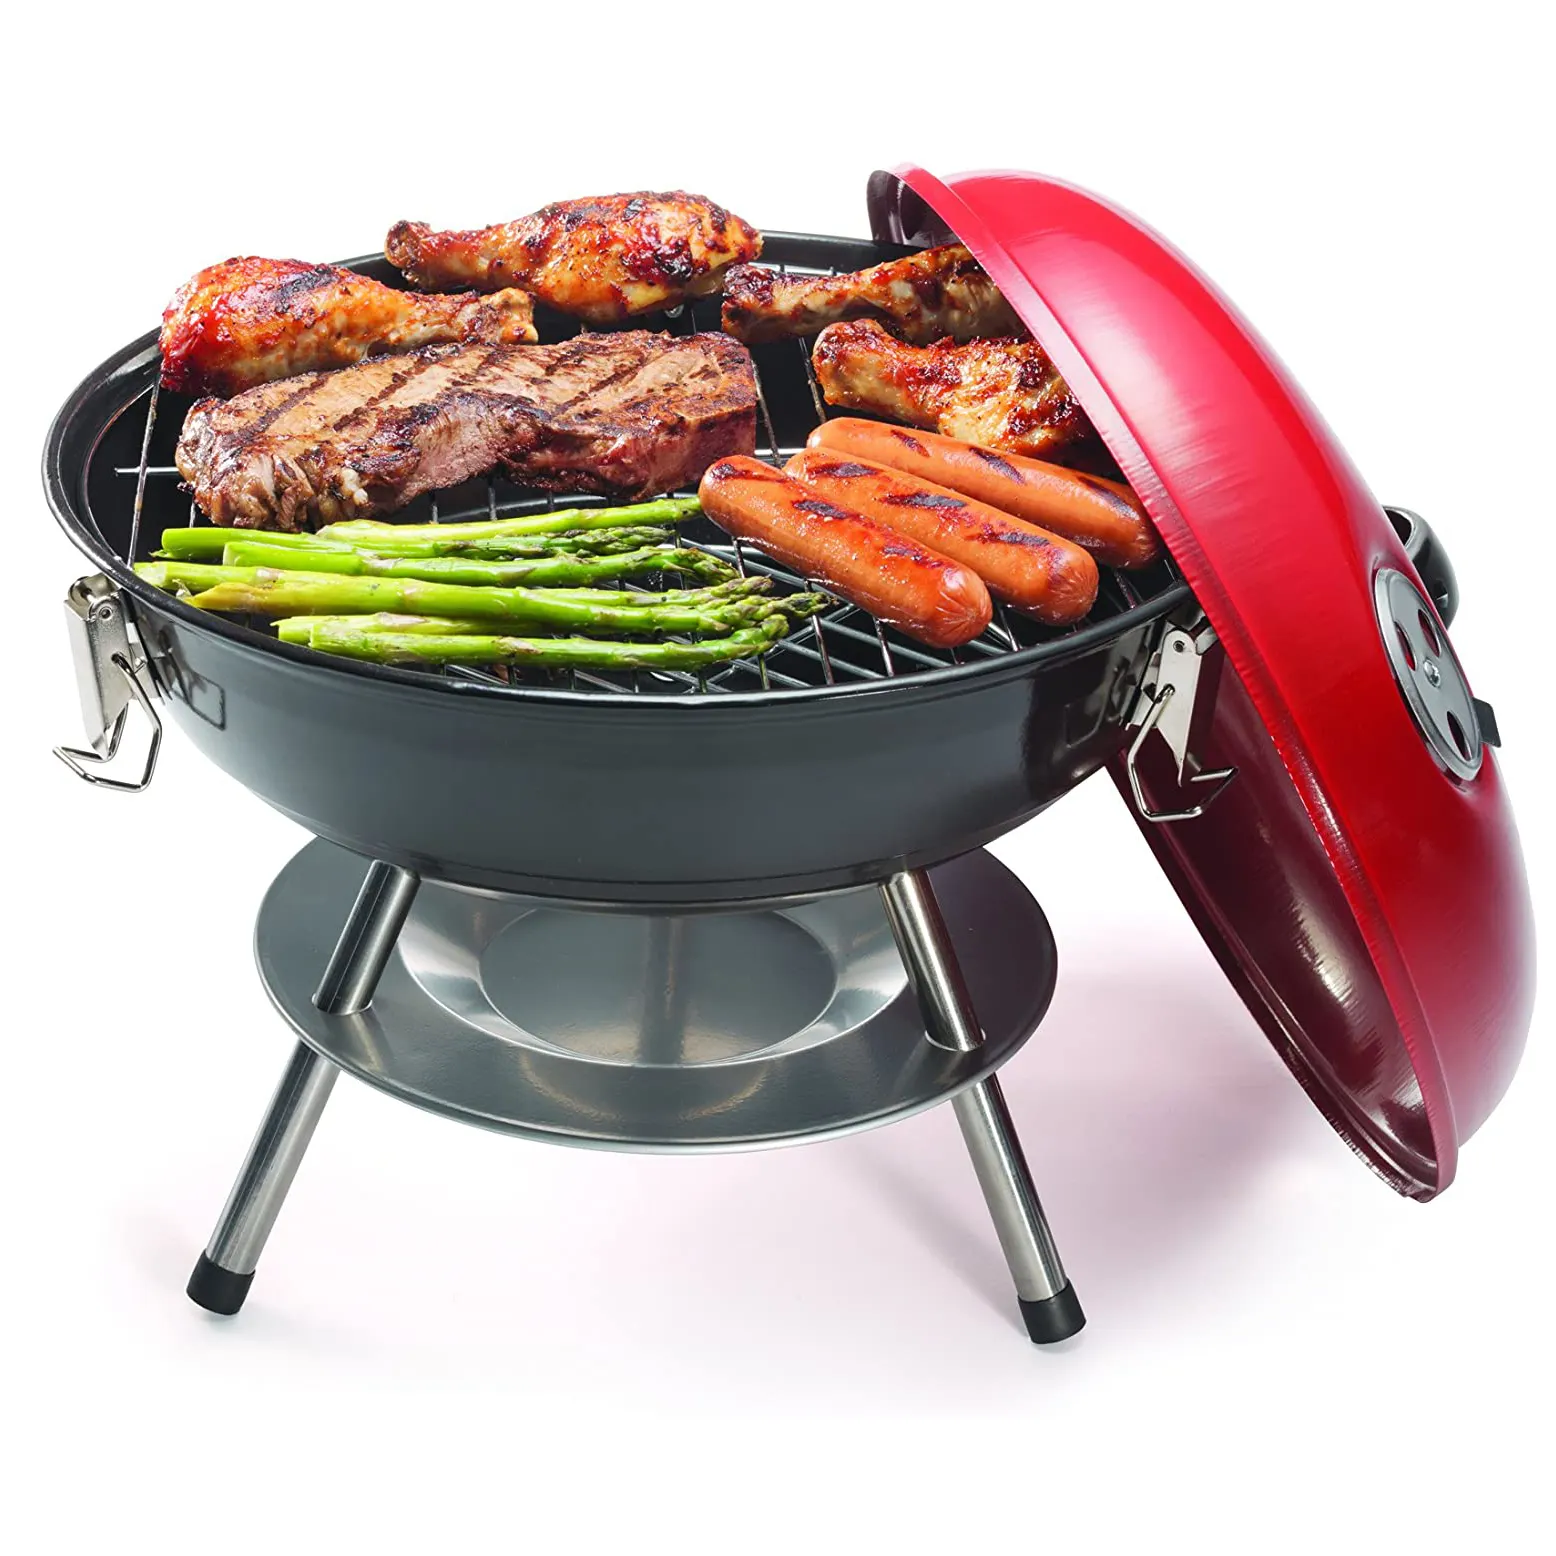 2023 New camping outdoor party Enamel 90RB Inch BBQ, 14" x 14" x 15", Portable Charcoal Grill, 14" (Red)